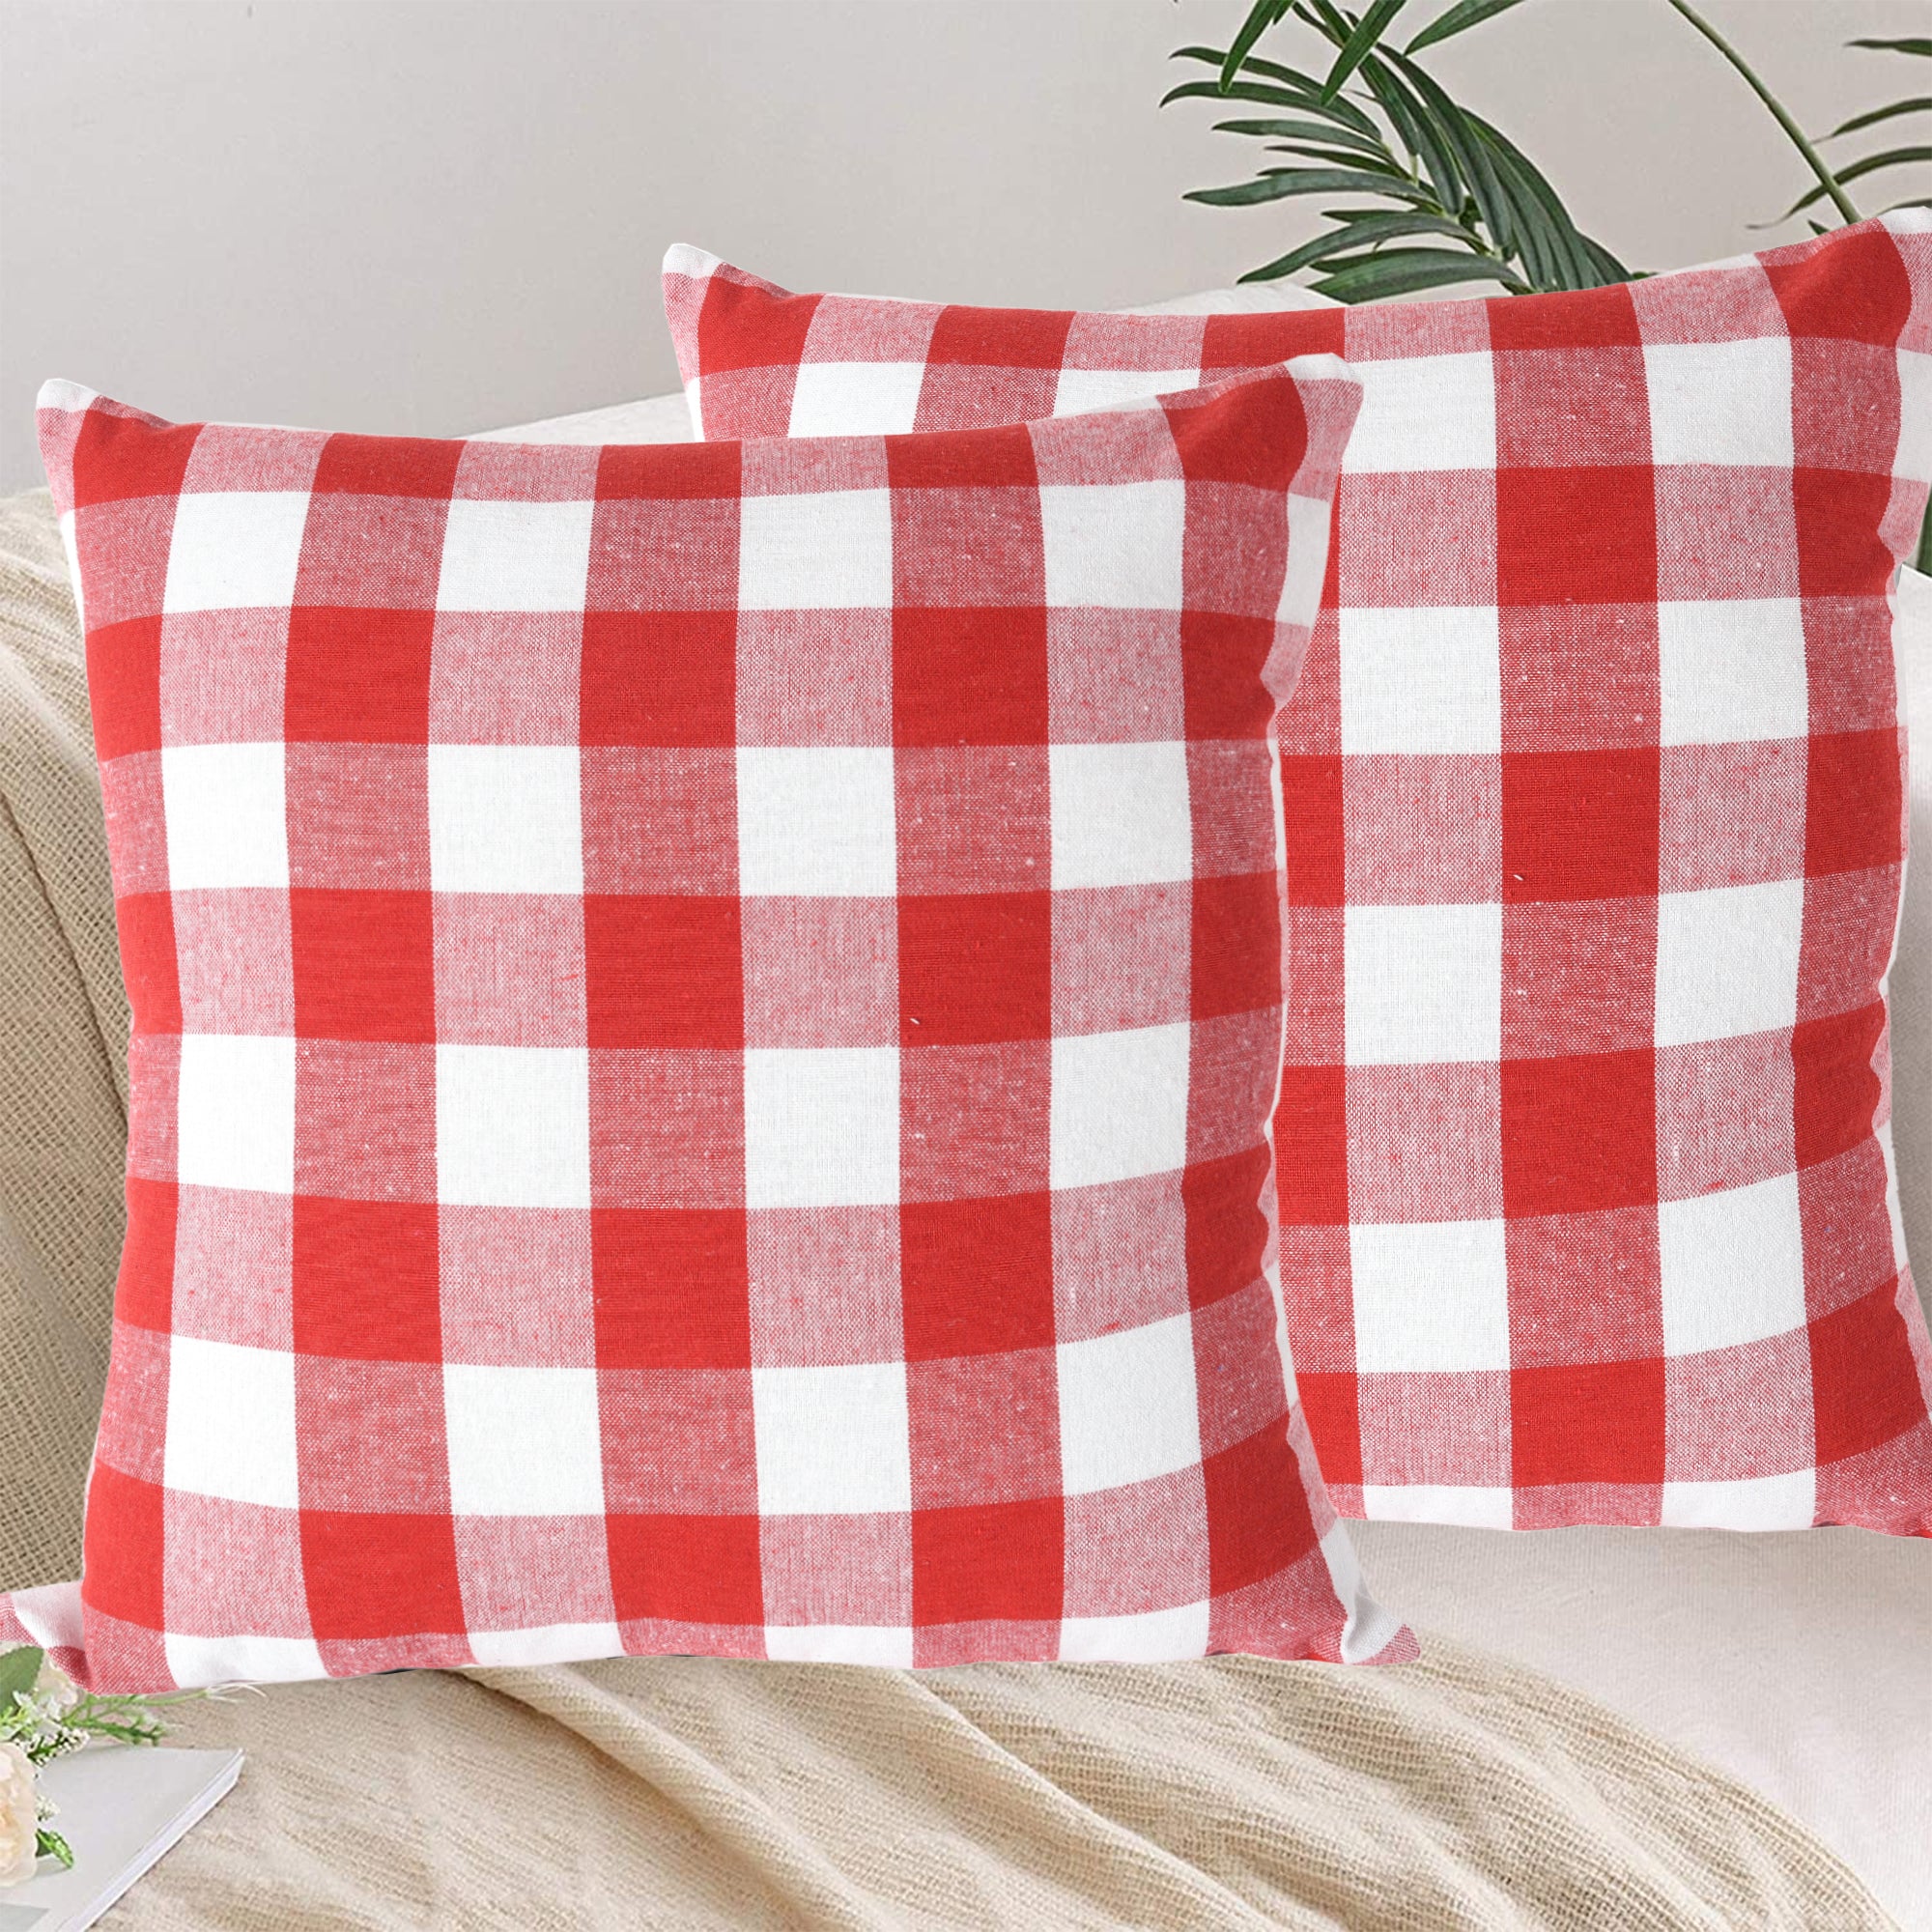 Lushomes Square Cushion Cover, Cotton Sofa Pillow Cover set of 4, 16x16 Inch, Big Checks, Red and White Checks, Pillow Cushions Covers (Pack of 4, 40x40 Cms)